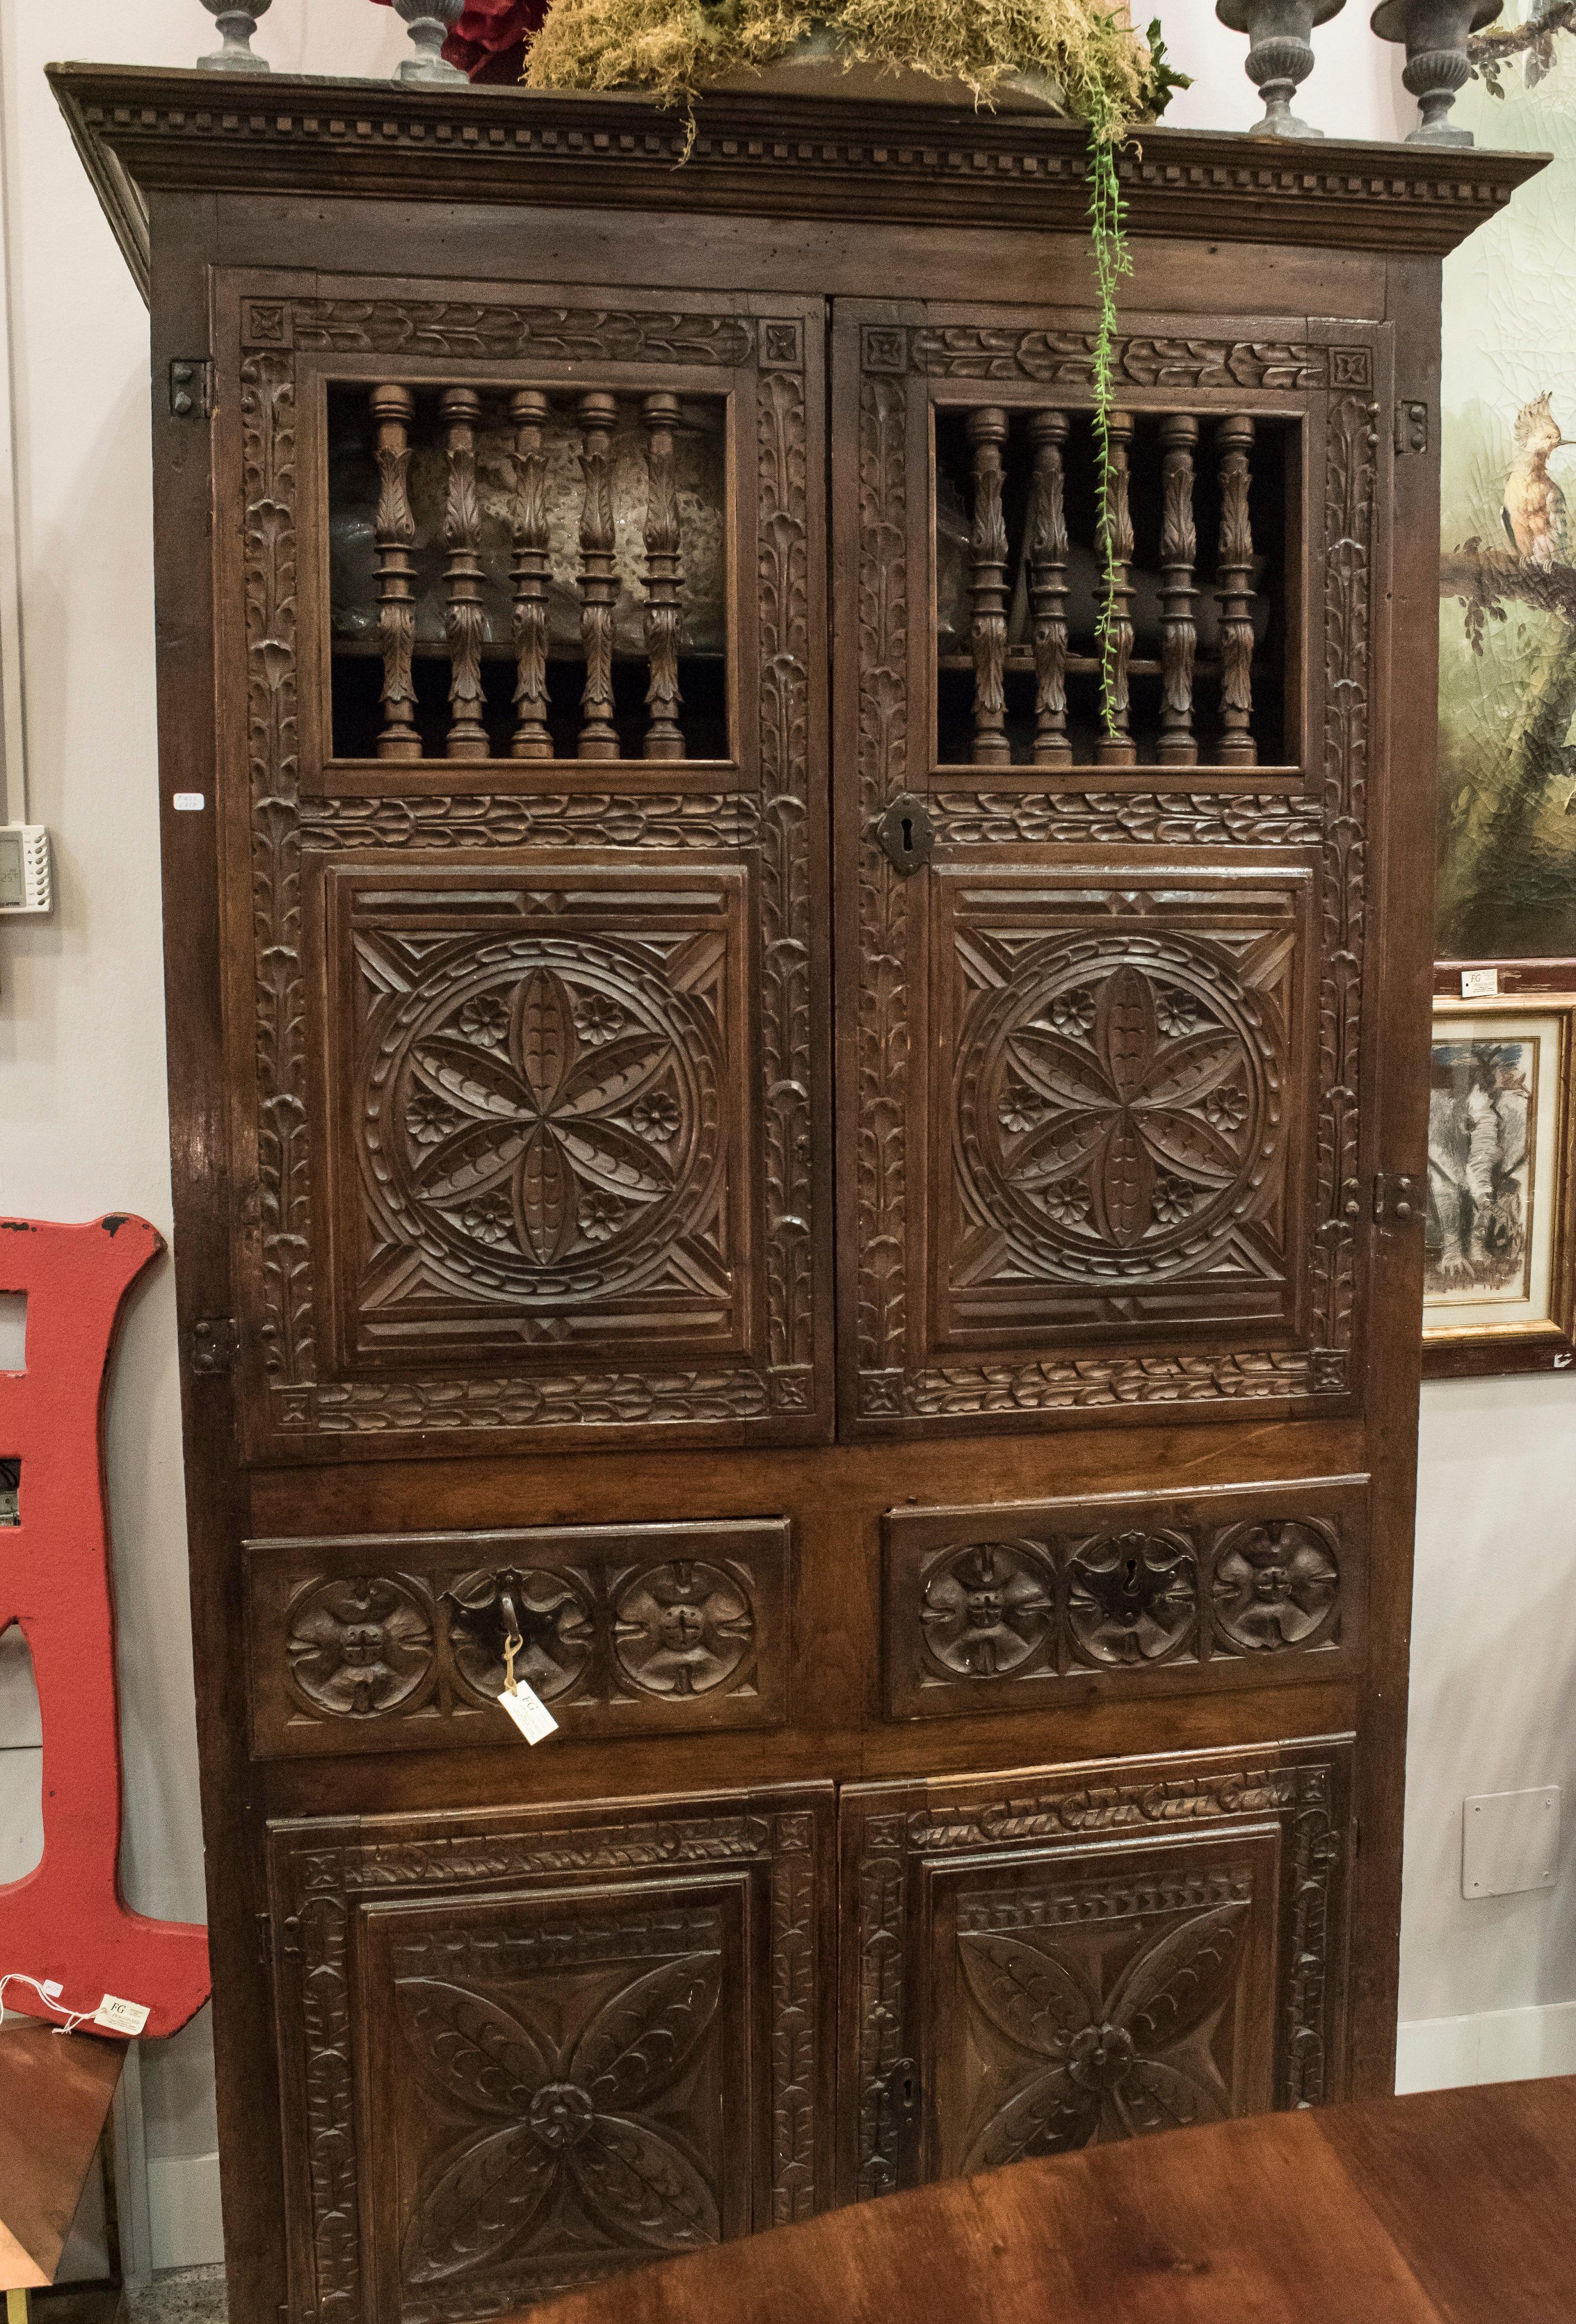 Amazing carved walnut buffet with key rings, handles in wrought iron. Celosia in the upper part.
Drawers in the interior and in the middle. Upper and lower doors. Toothed cornice.
One of a kind carved walnut S XVII buffet from the north of Spain